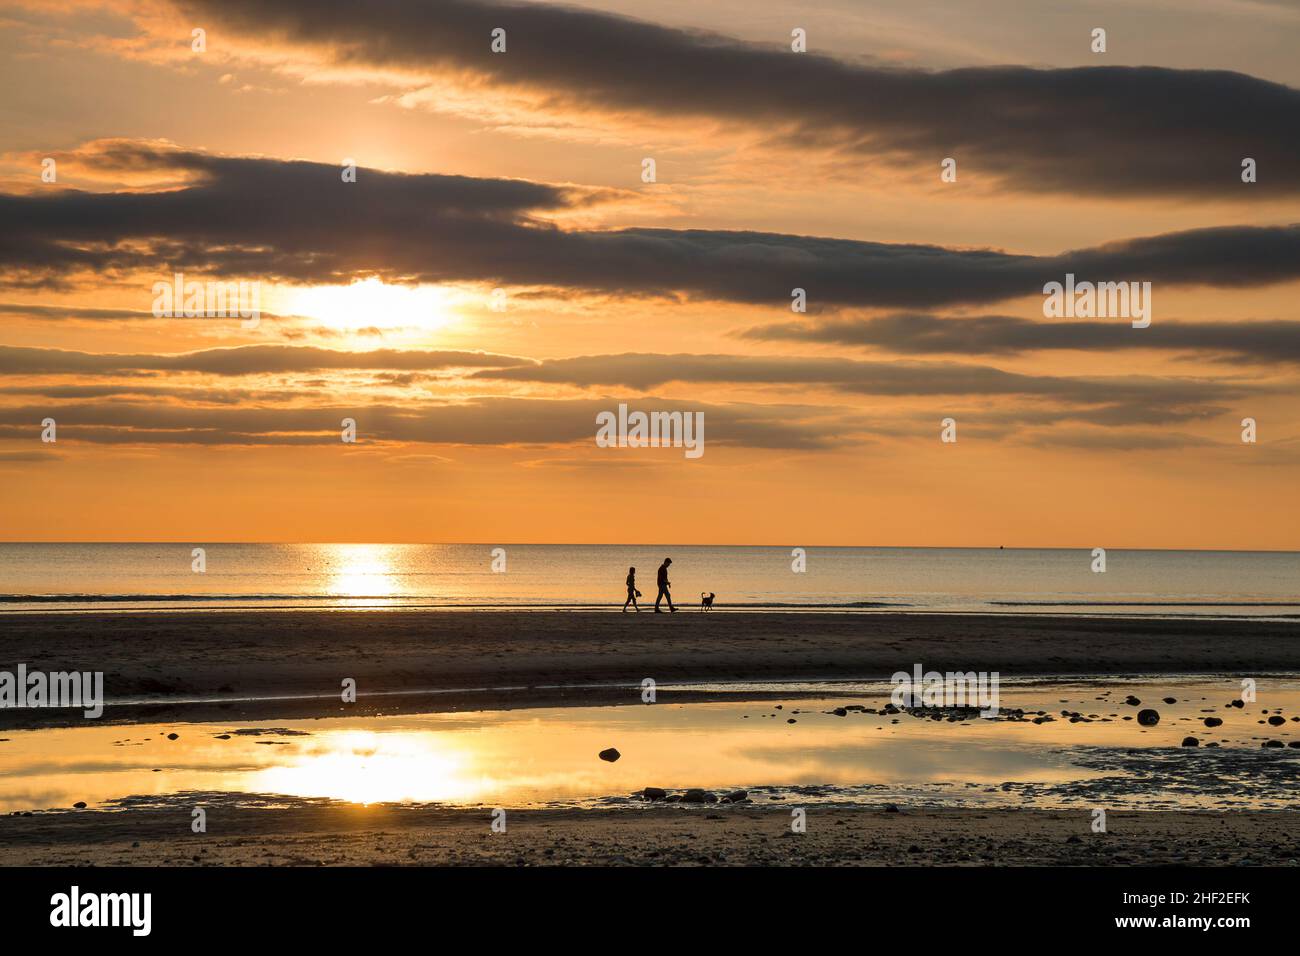 UK sunset beach landscape with young couple and pet dog silhouetted in the distance, walking on the shoreline sand. Stock Photo